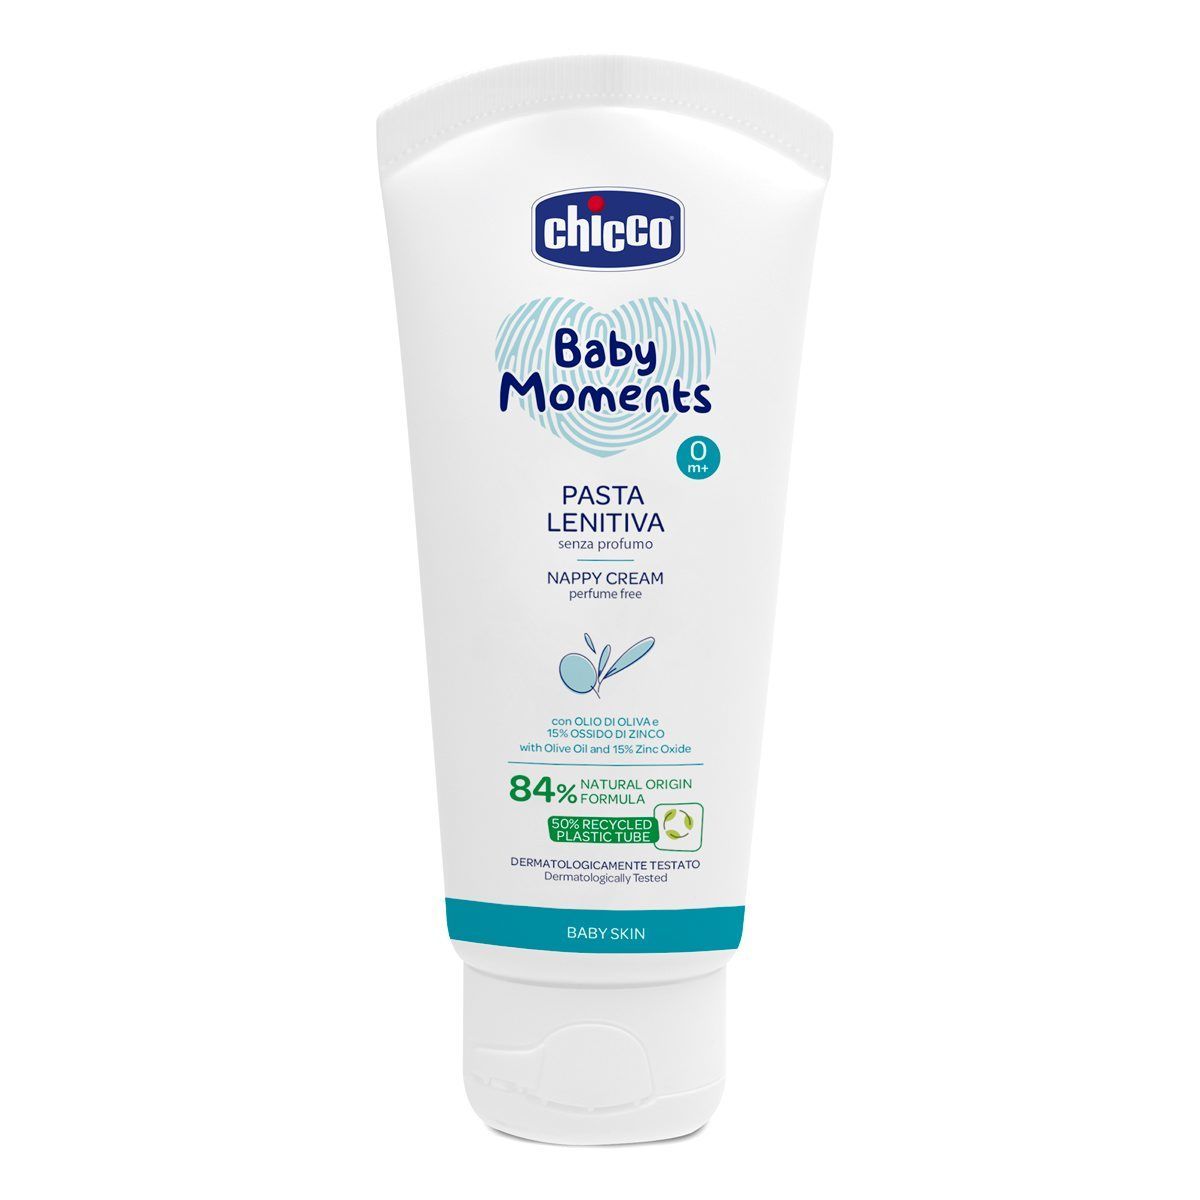 chicco baby moments pasta lenitiva